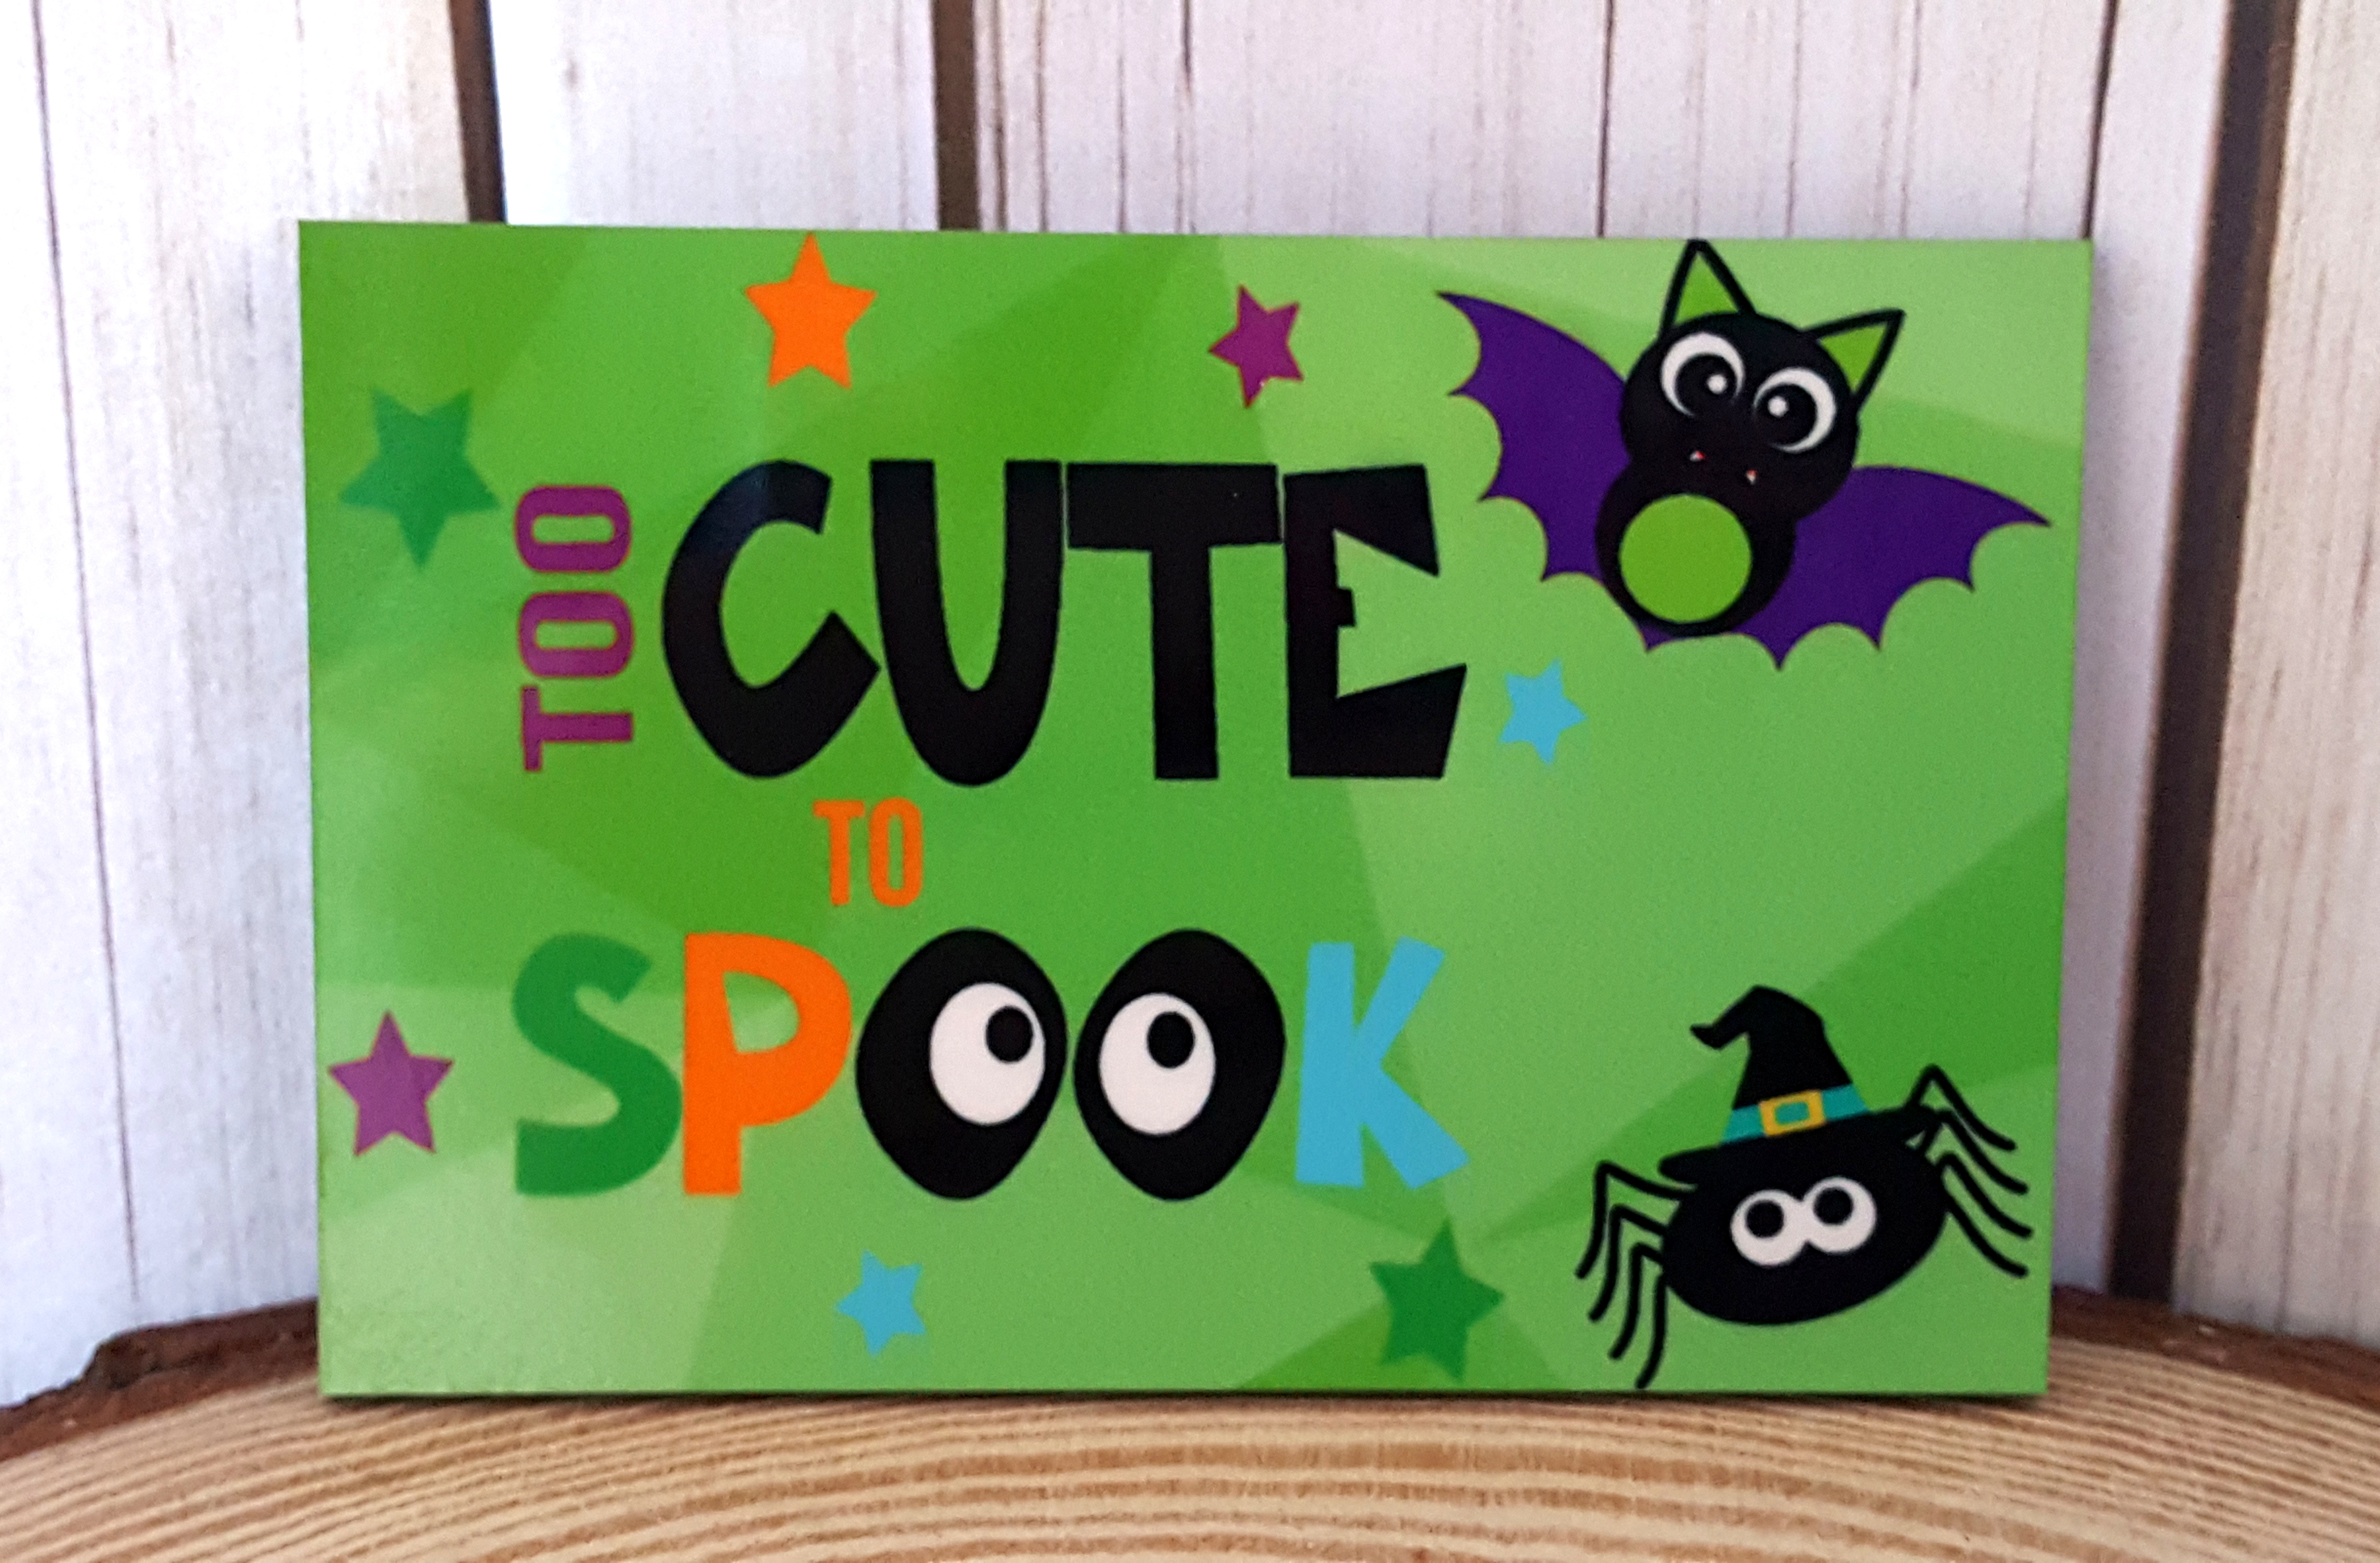 Too Cute To Spook made with sublimation printing